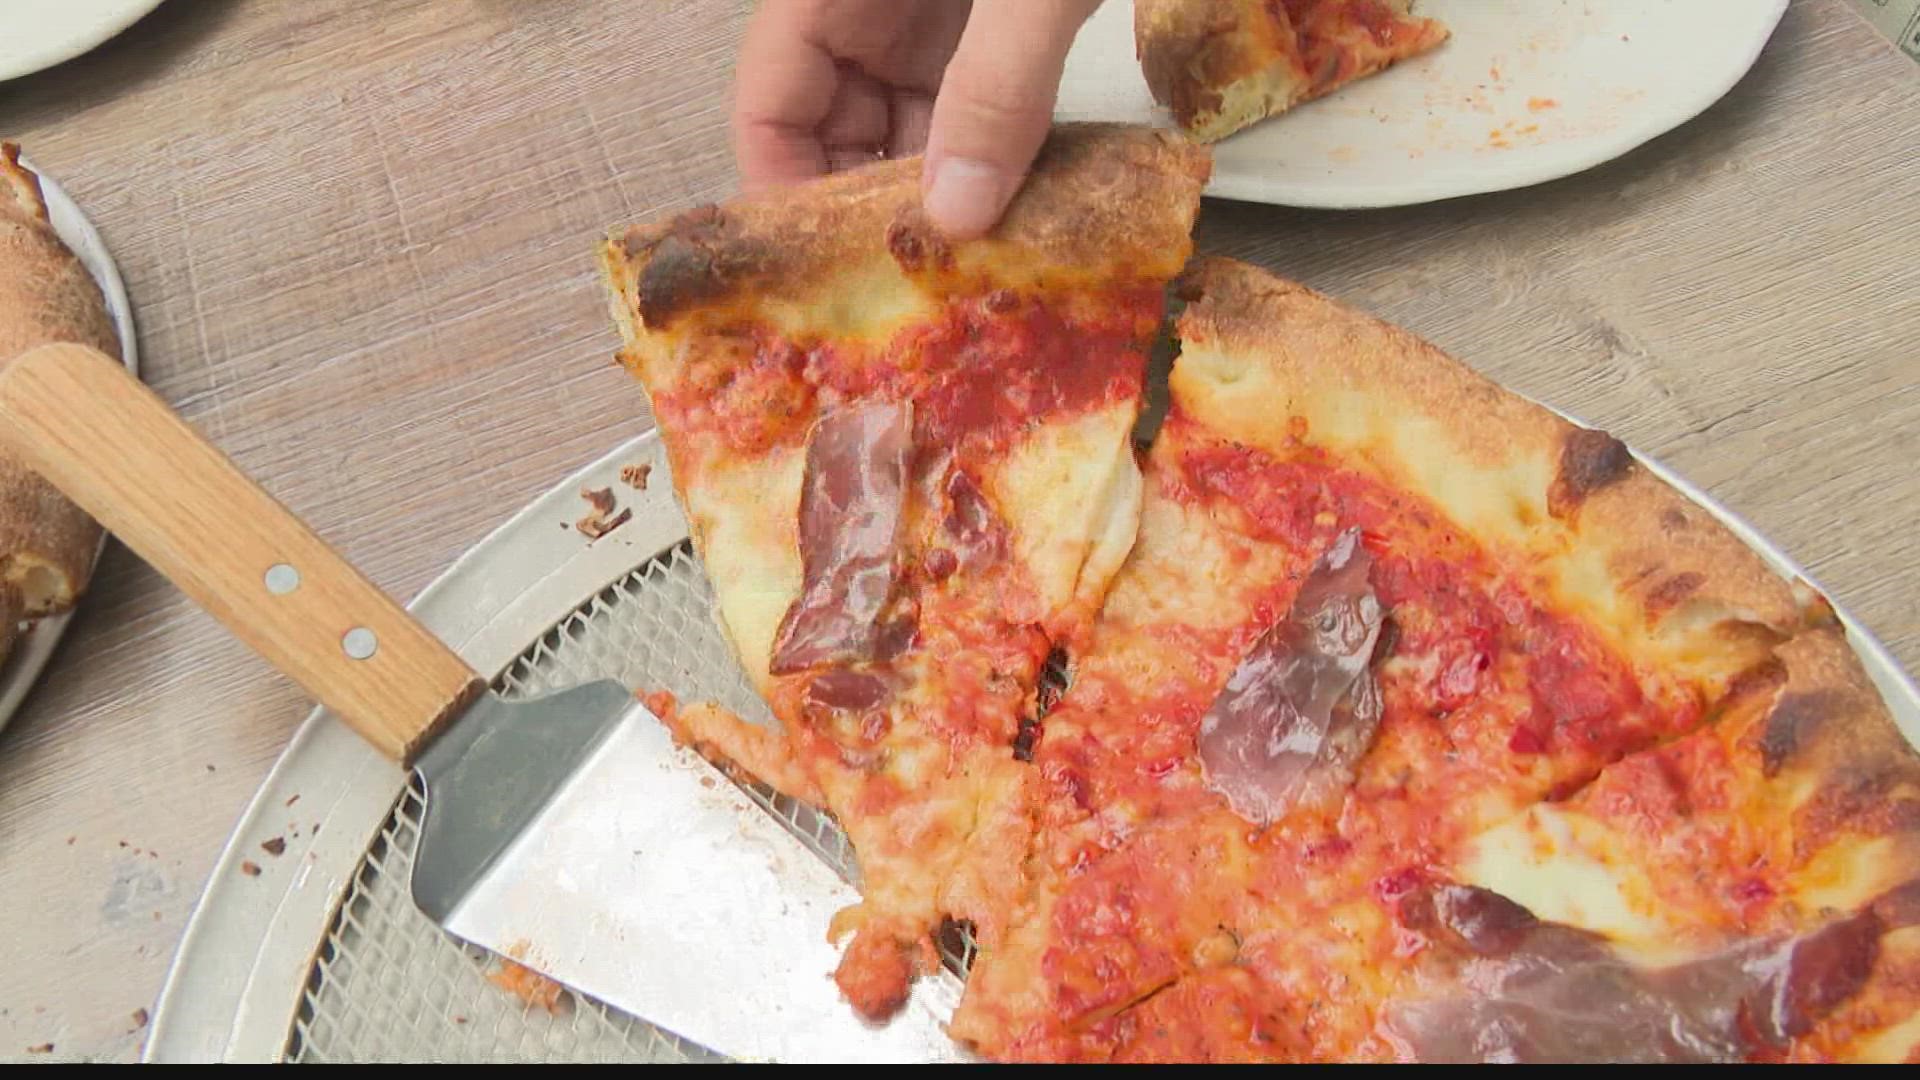 Chicago is forever linked to the art of making and tasting pizza.